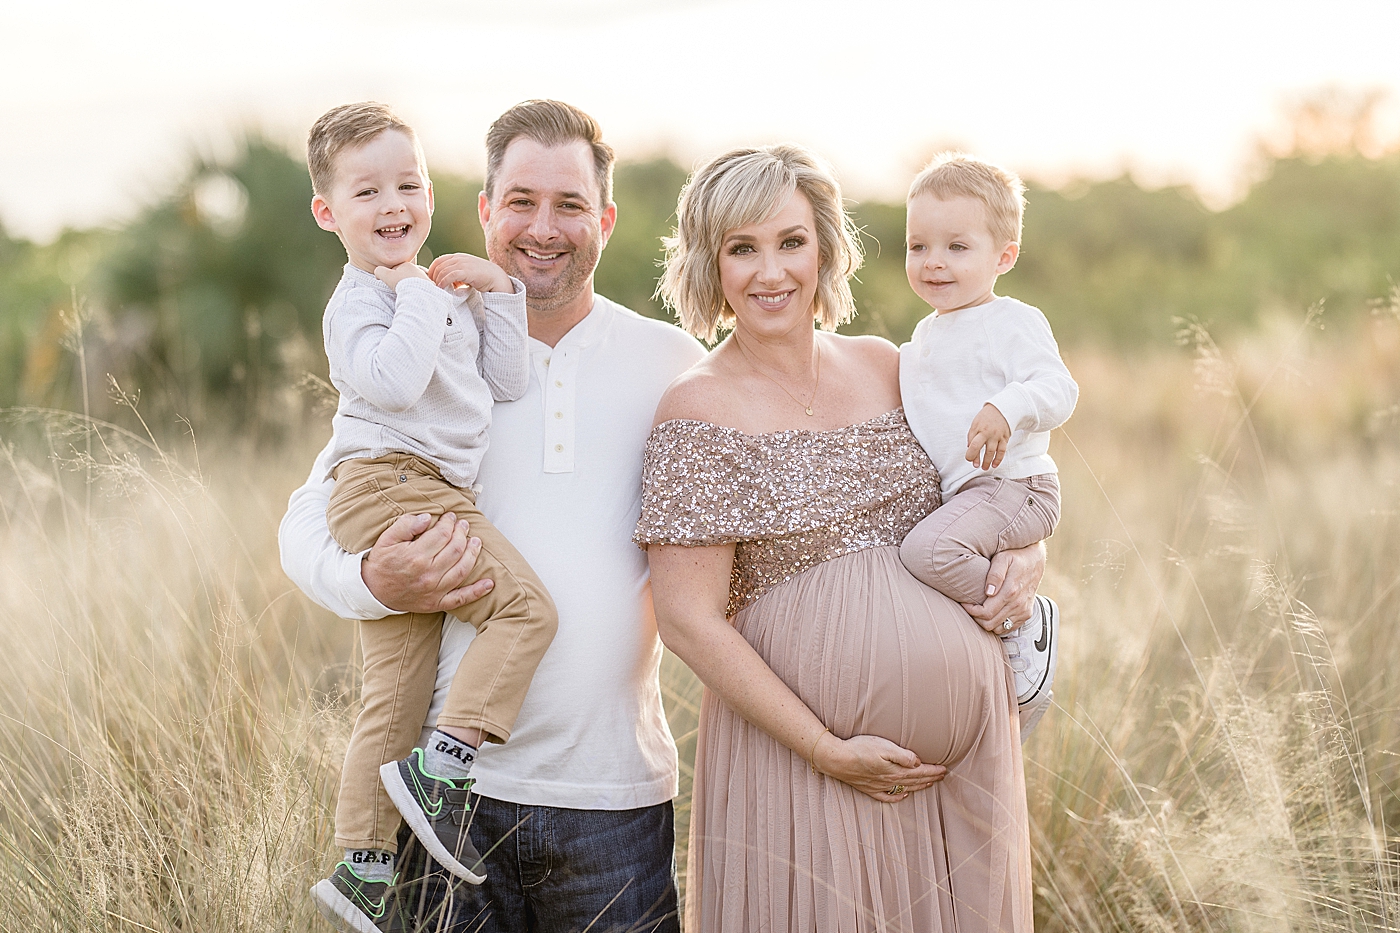 Maternity session at Cypress Point Park with Brittany Elise Photography.